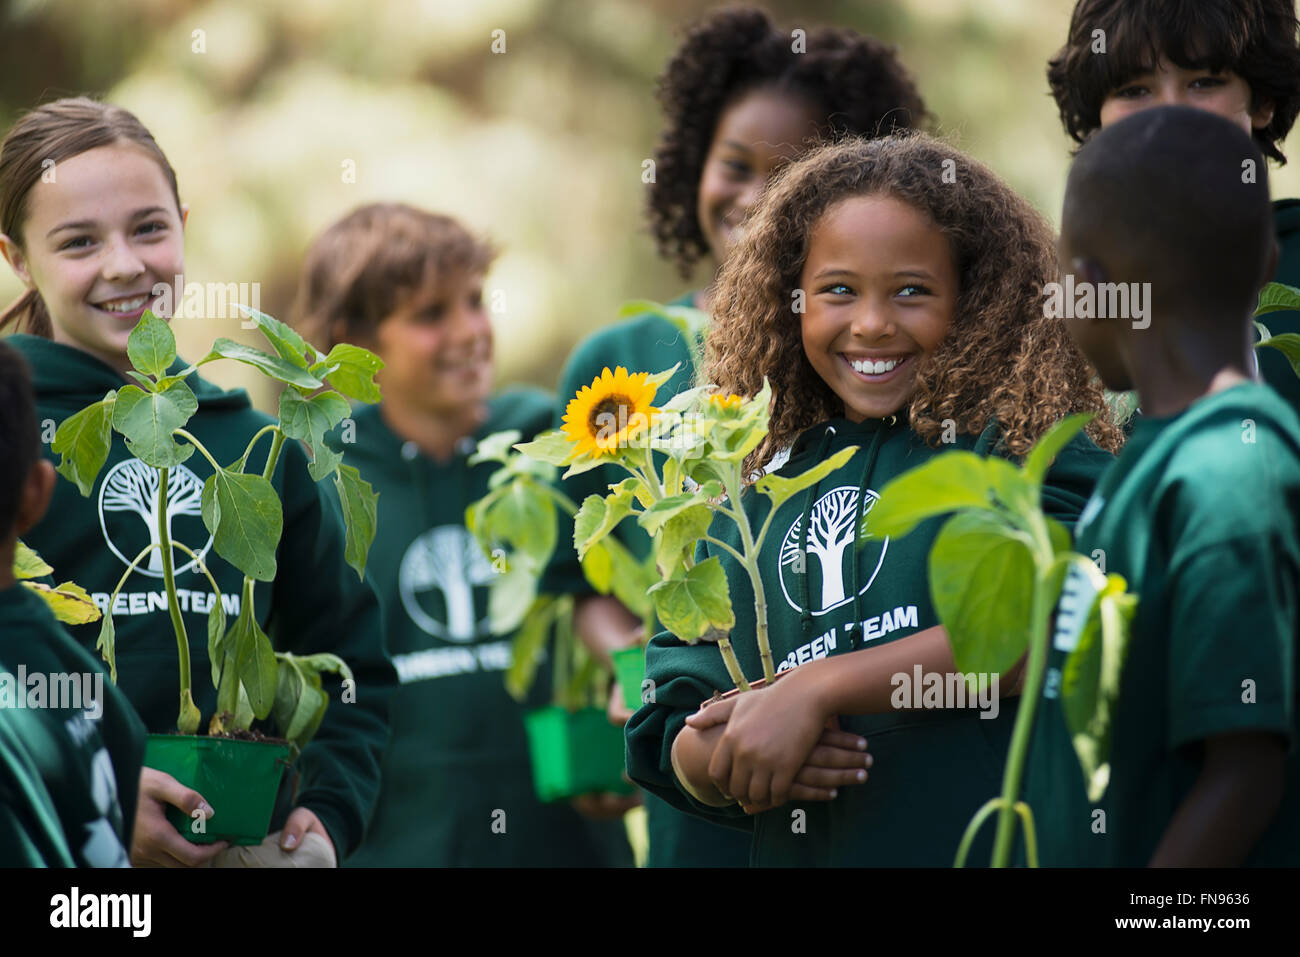 Children in a group learning about plants and flowers, carrying plants and sunflowers. Stock Photo